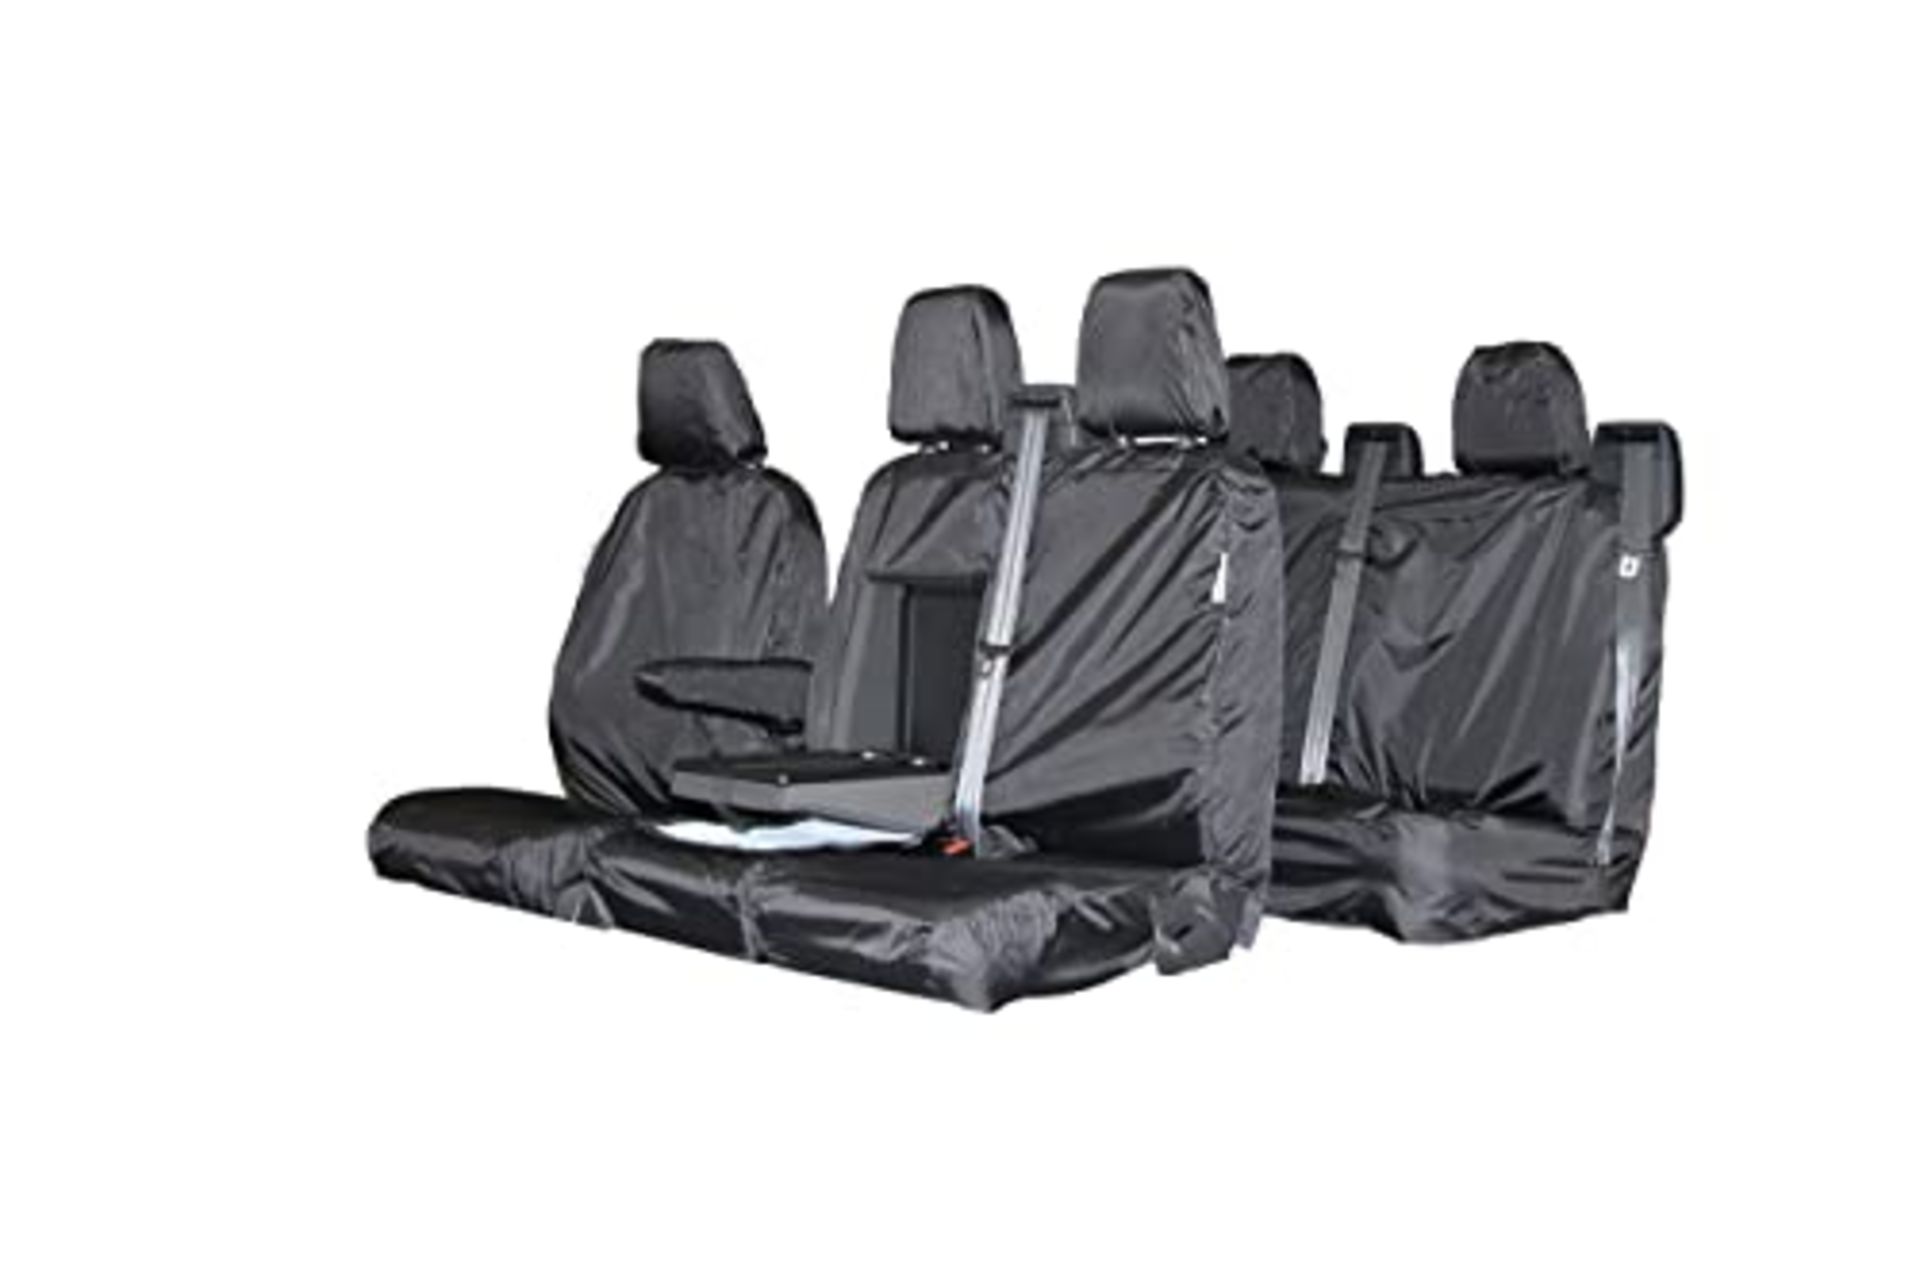 Heavy Duty Covers, Waterproof Seat Cover to fit Ford Transit Custom Crew Cab Fronts and Rears